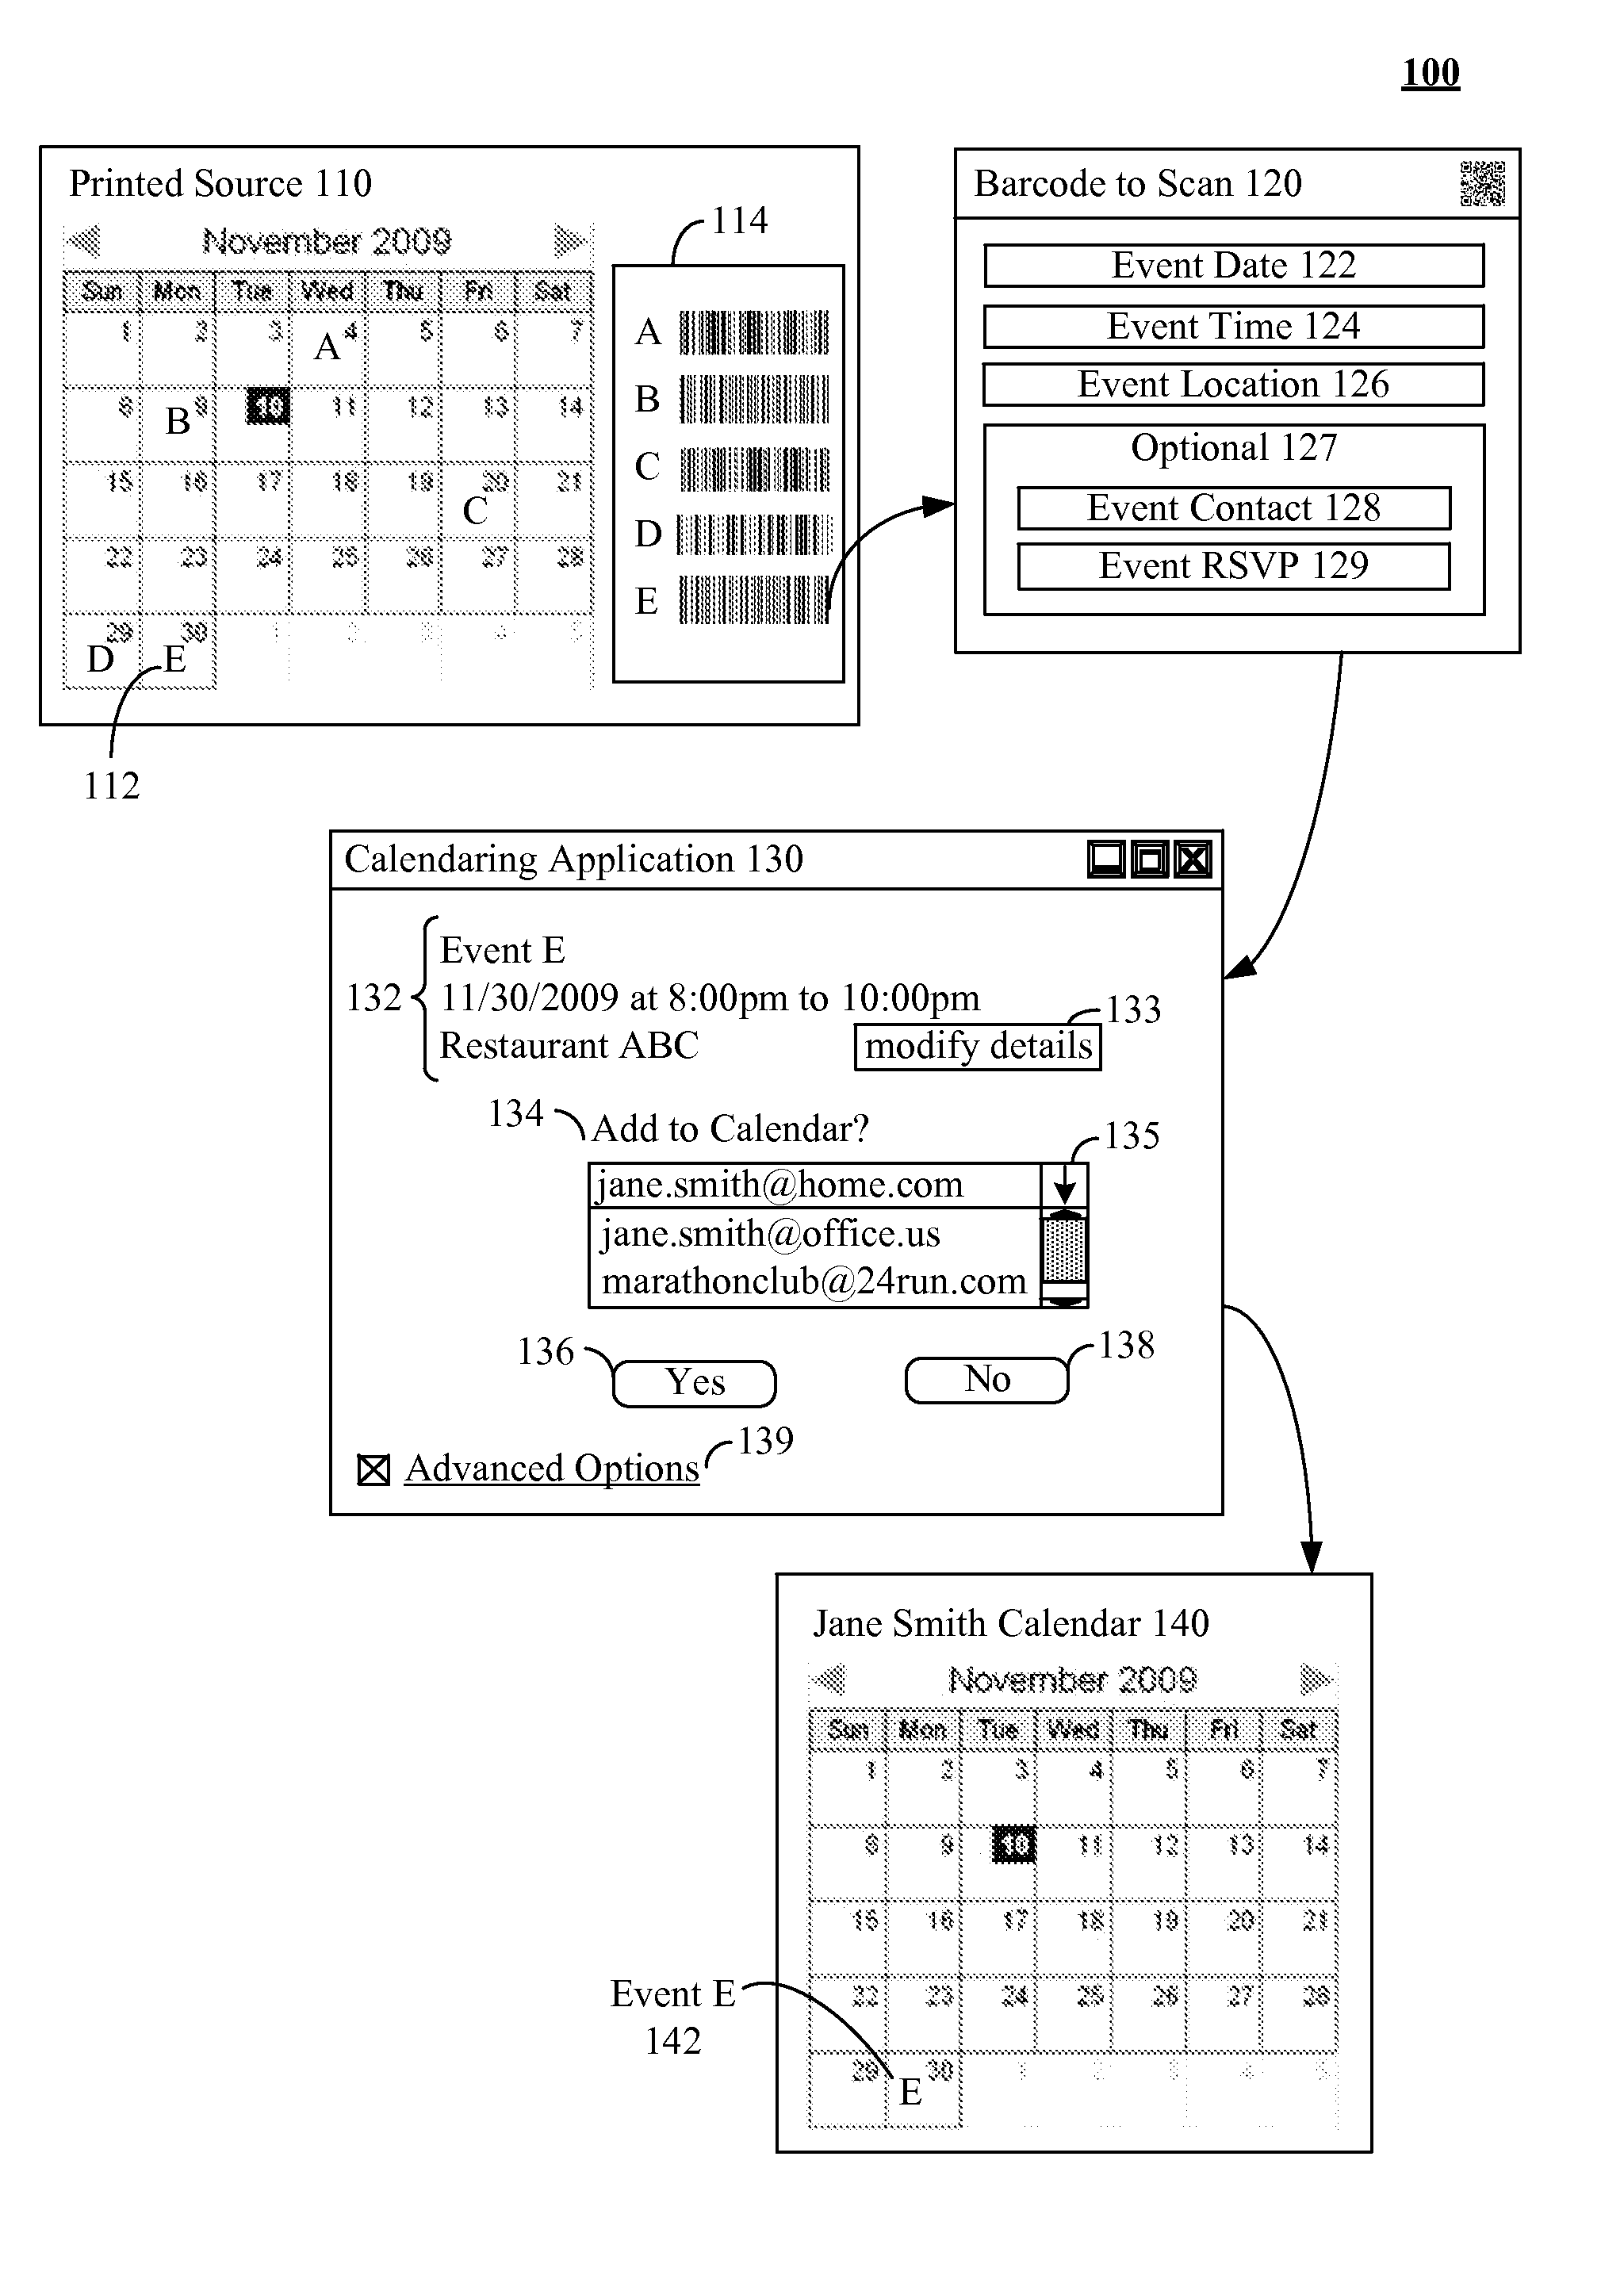 Storing events in an electronic calendar from a printed source